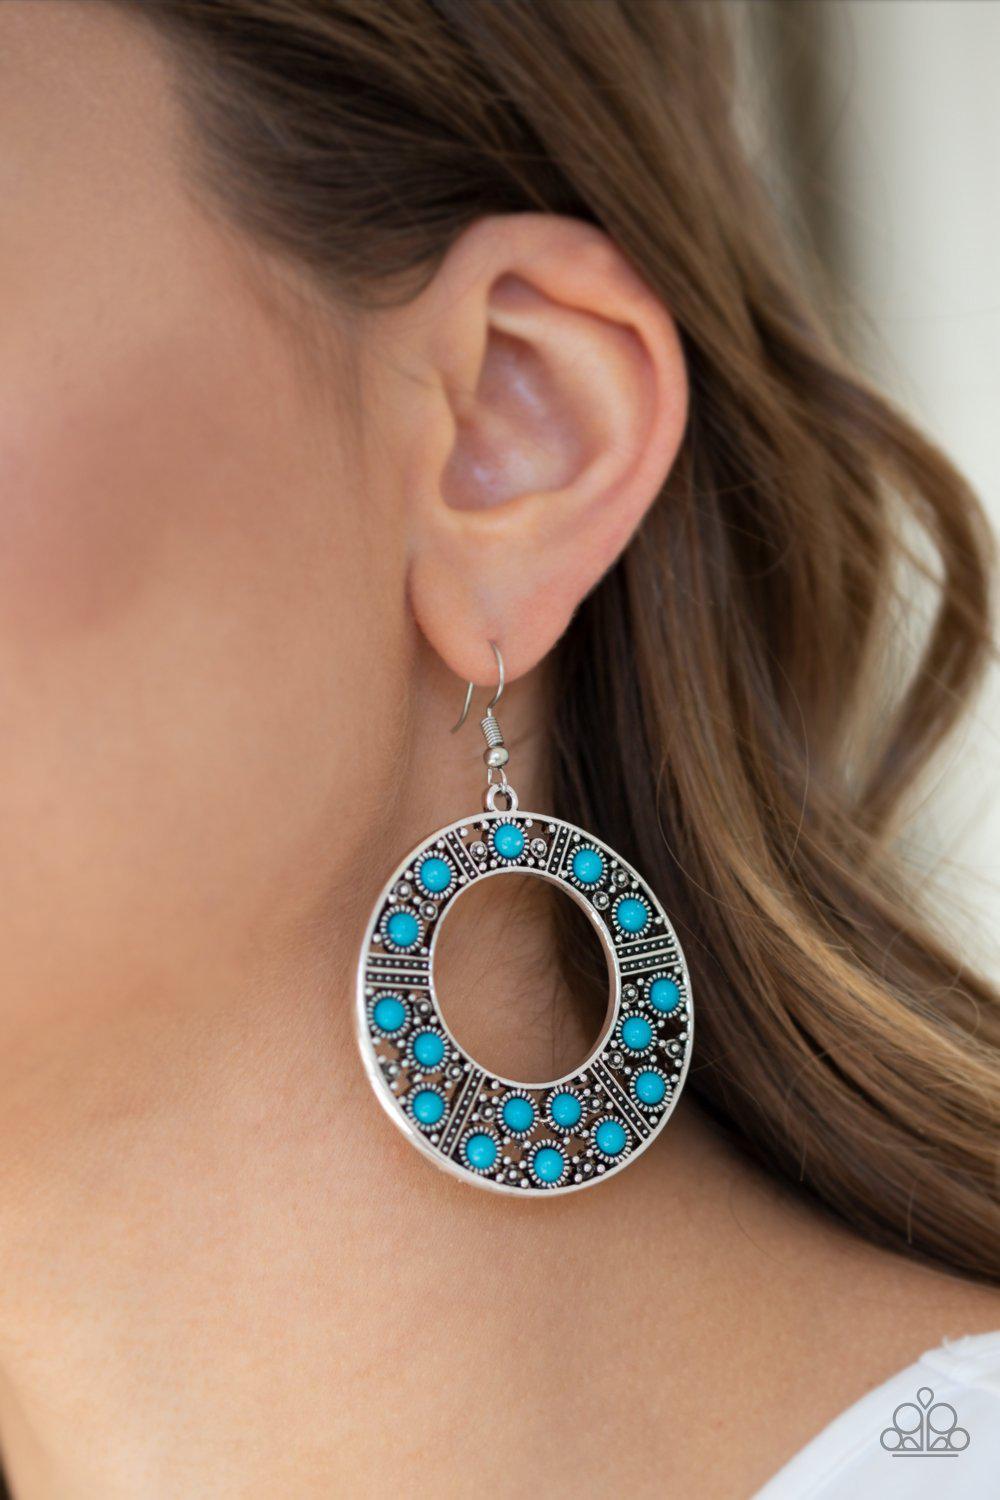 San Diego Samba Blue and Silver Earrings - Paparazzi Accessories-CarasShop.com - $5 Jewelry by Cara Jewels